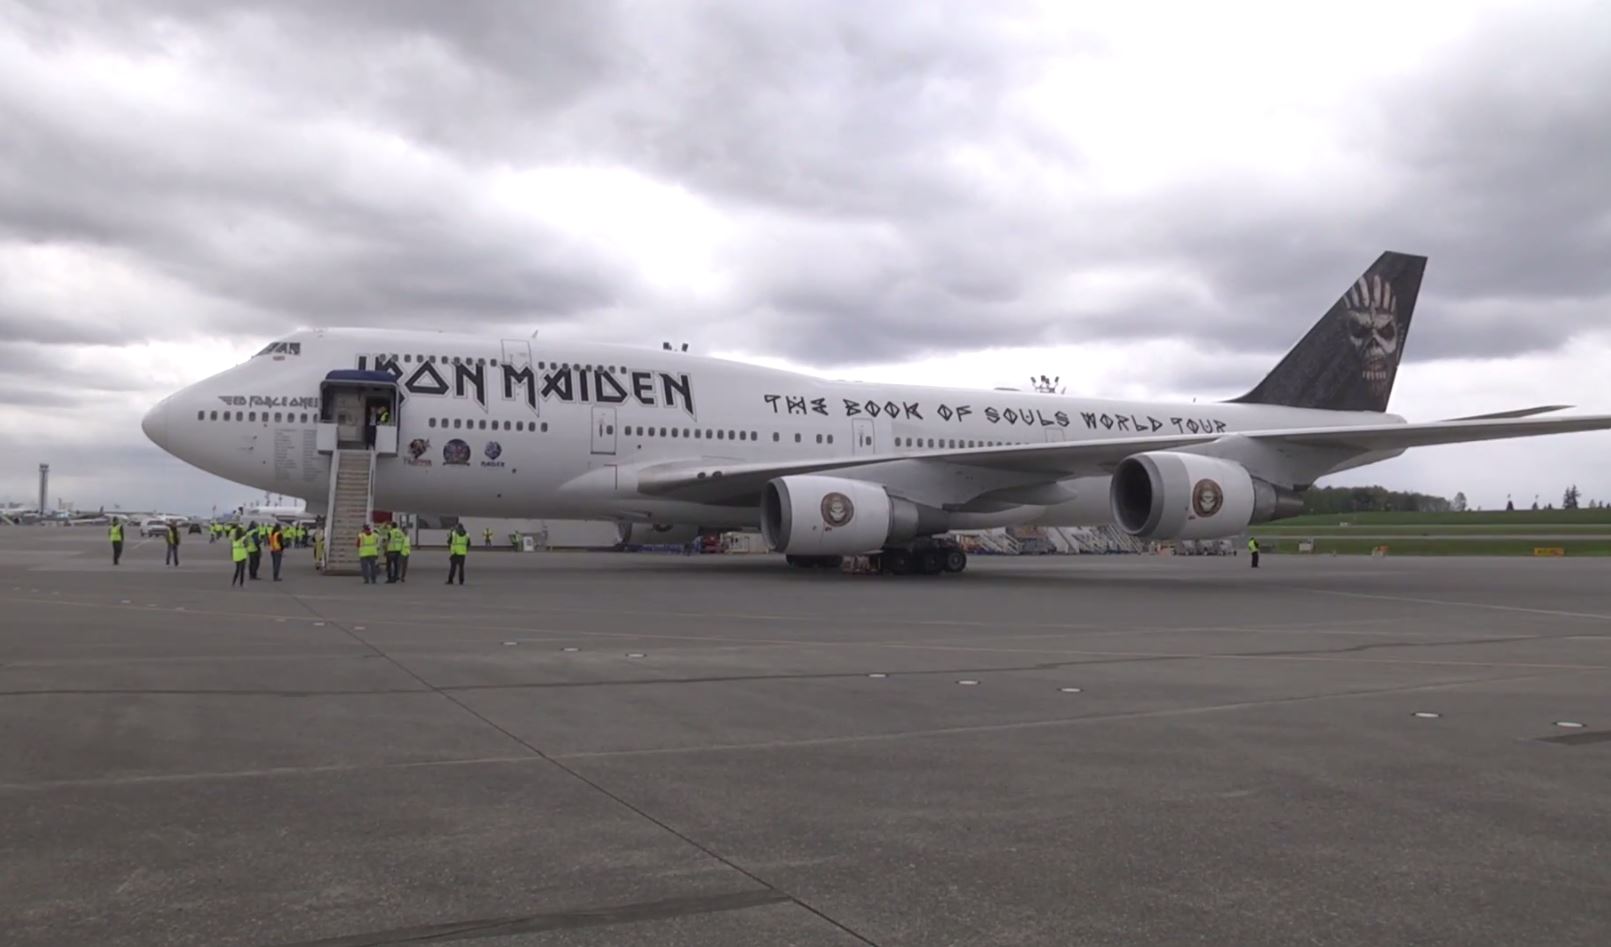 Iron Maiden’s Ed Force One Rocks Boeing